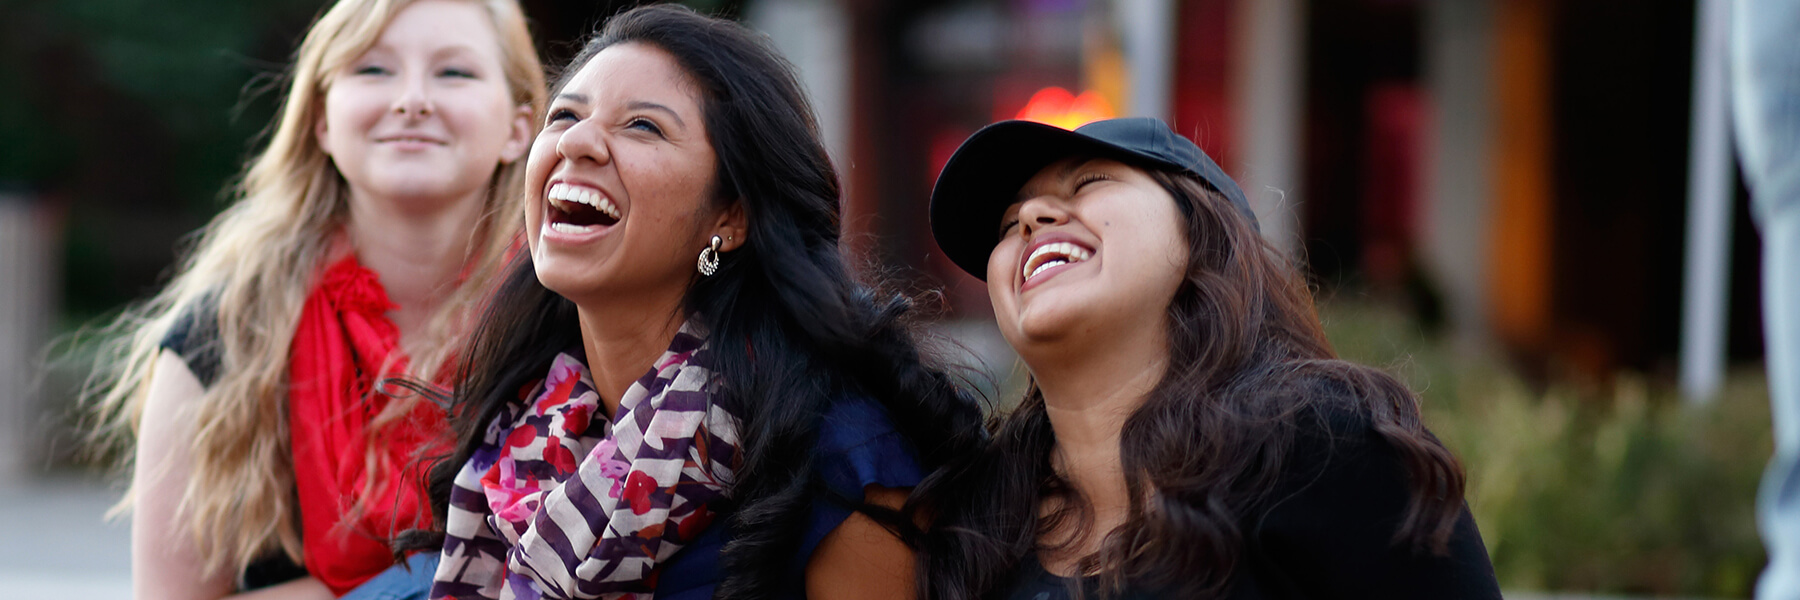 Three female students laughing together outdoors.